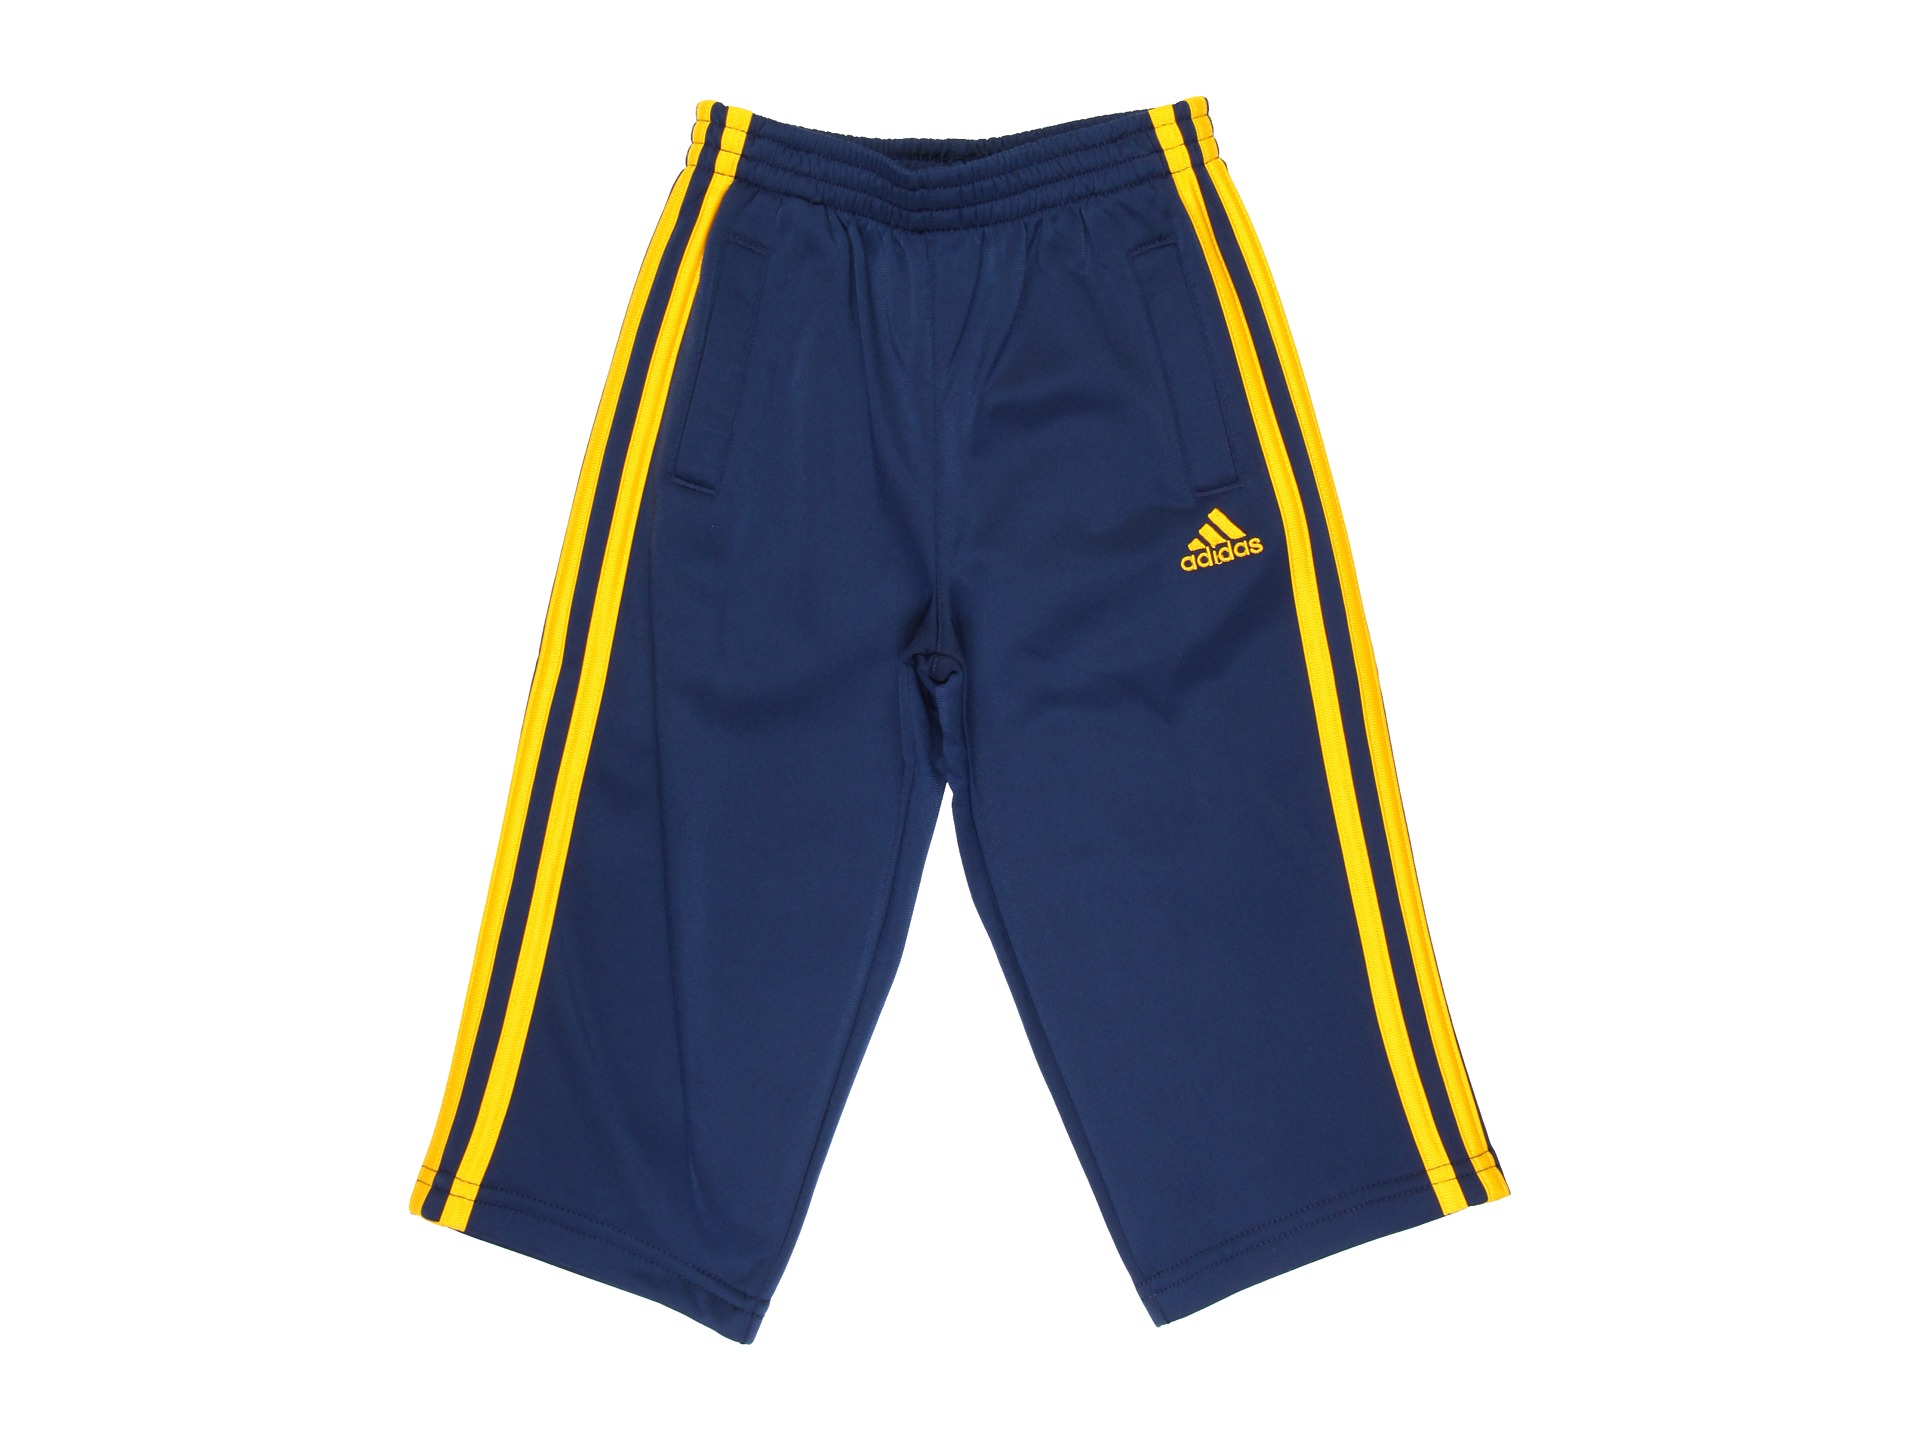   Tricot Pant (Toddler/Little Kids) $28.99 $32.00 